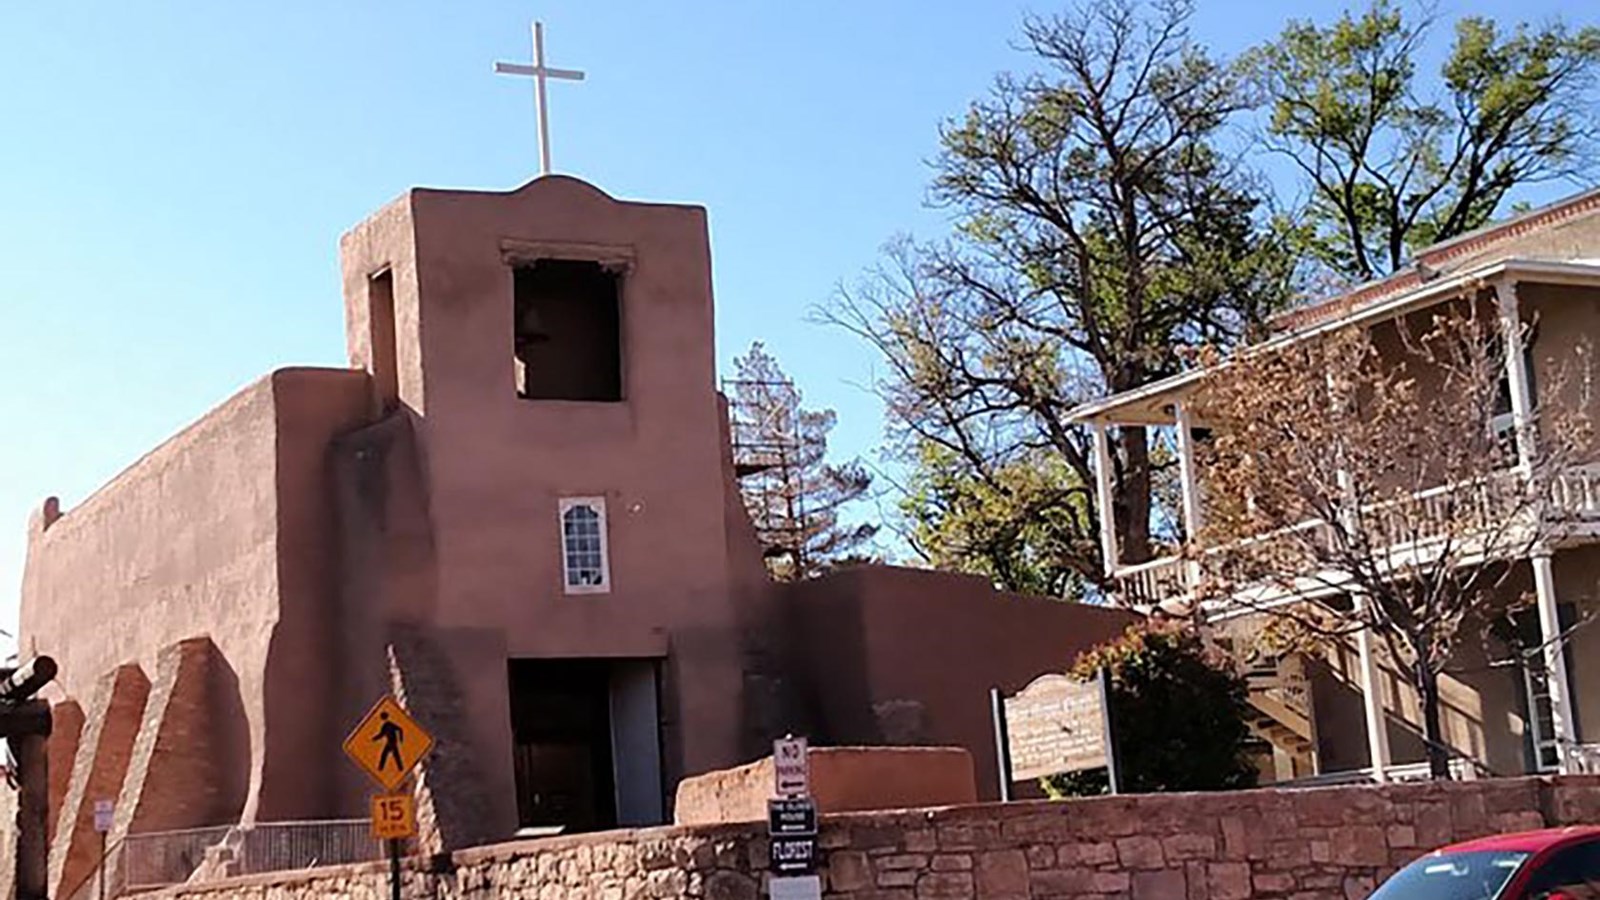 A small adobe, single tower chapel with a stone wall surrounding it.